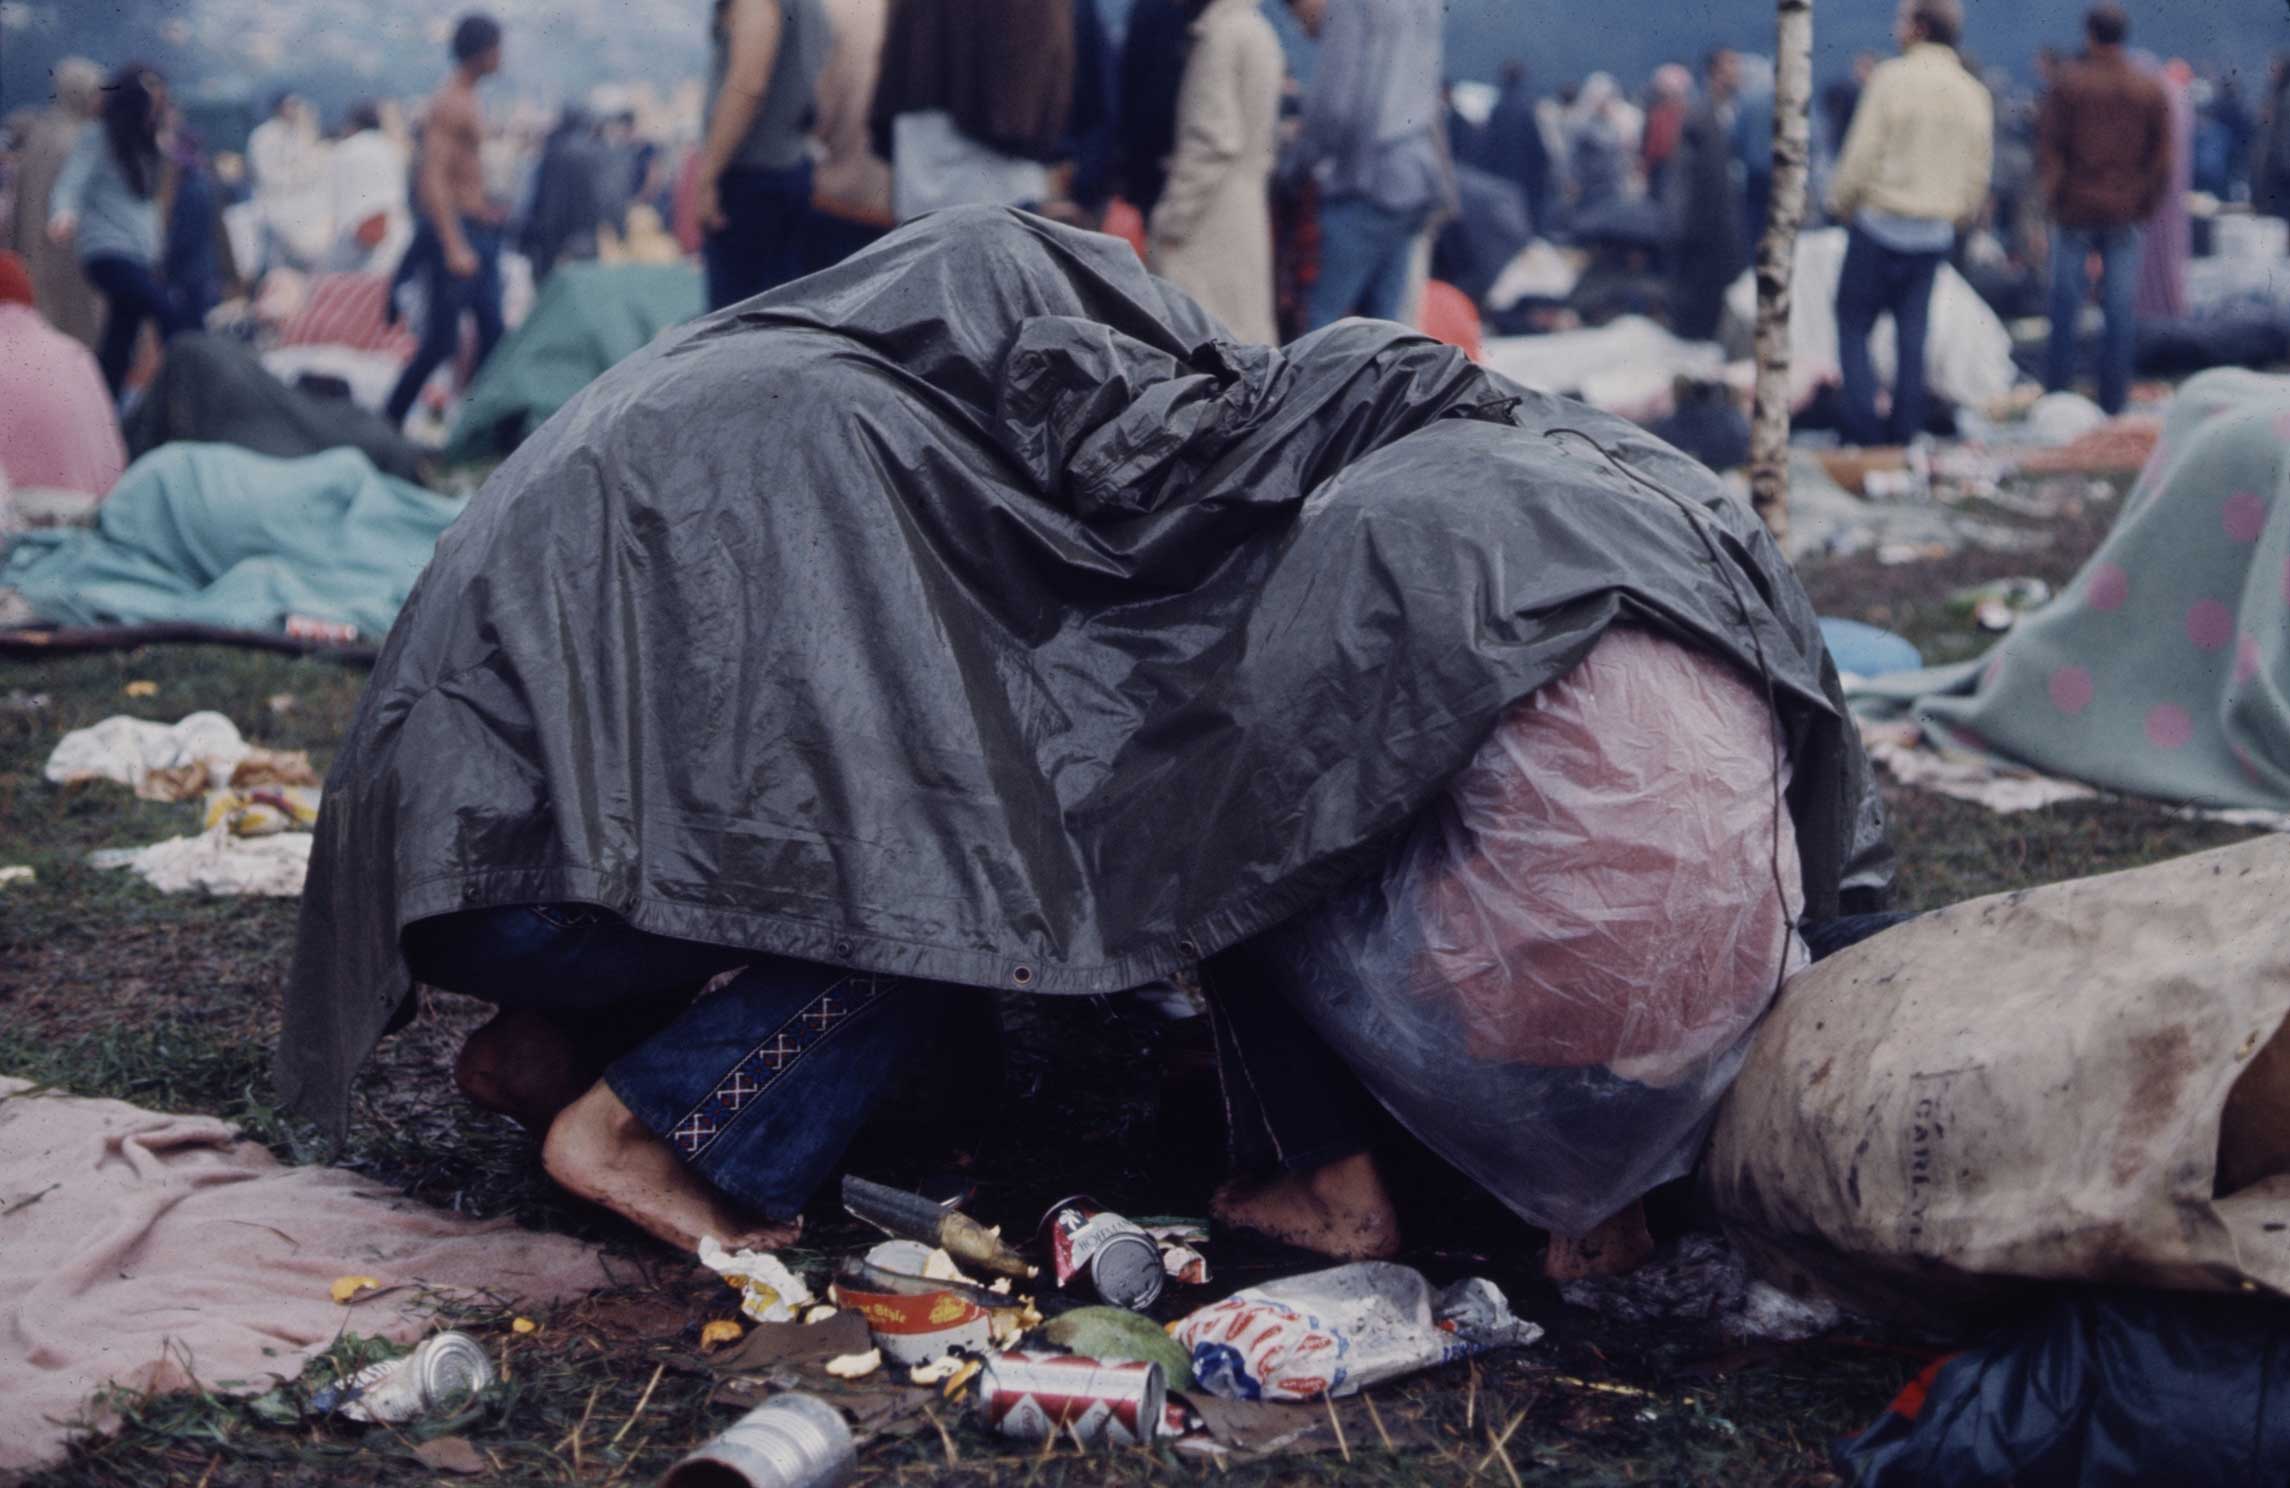 <b>Not published in LIFE.</b> Woodstock Music &amp; Art Fair, August 1969. (John Dominis&mdash;Time &amp; Life Pictures/Getty Images)